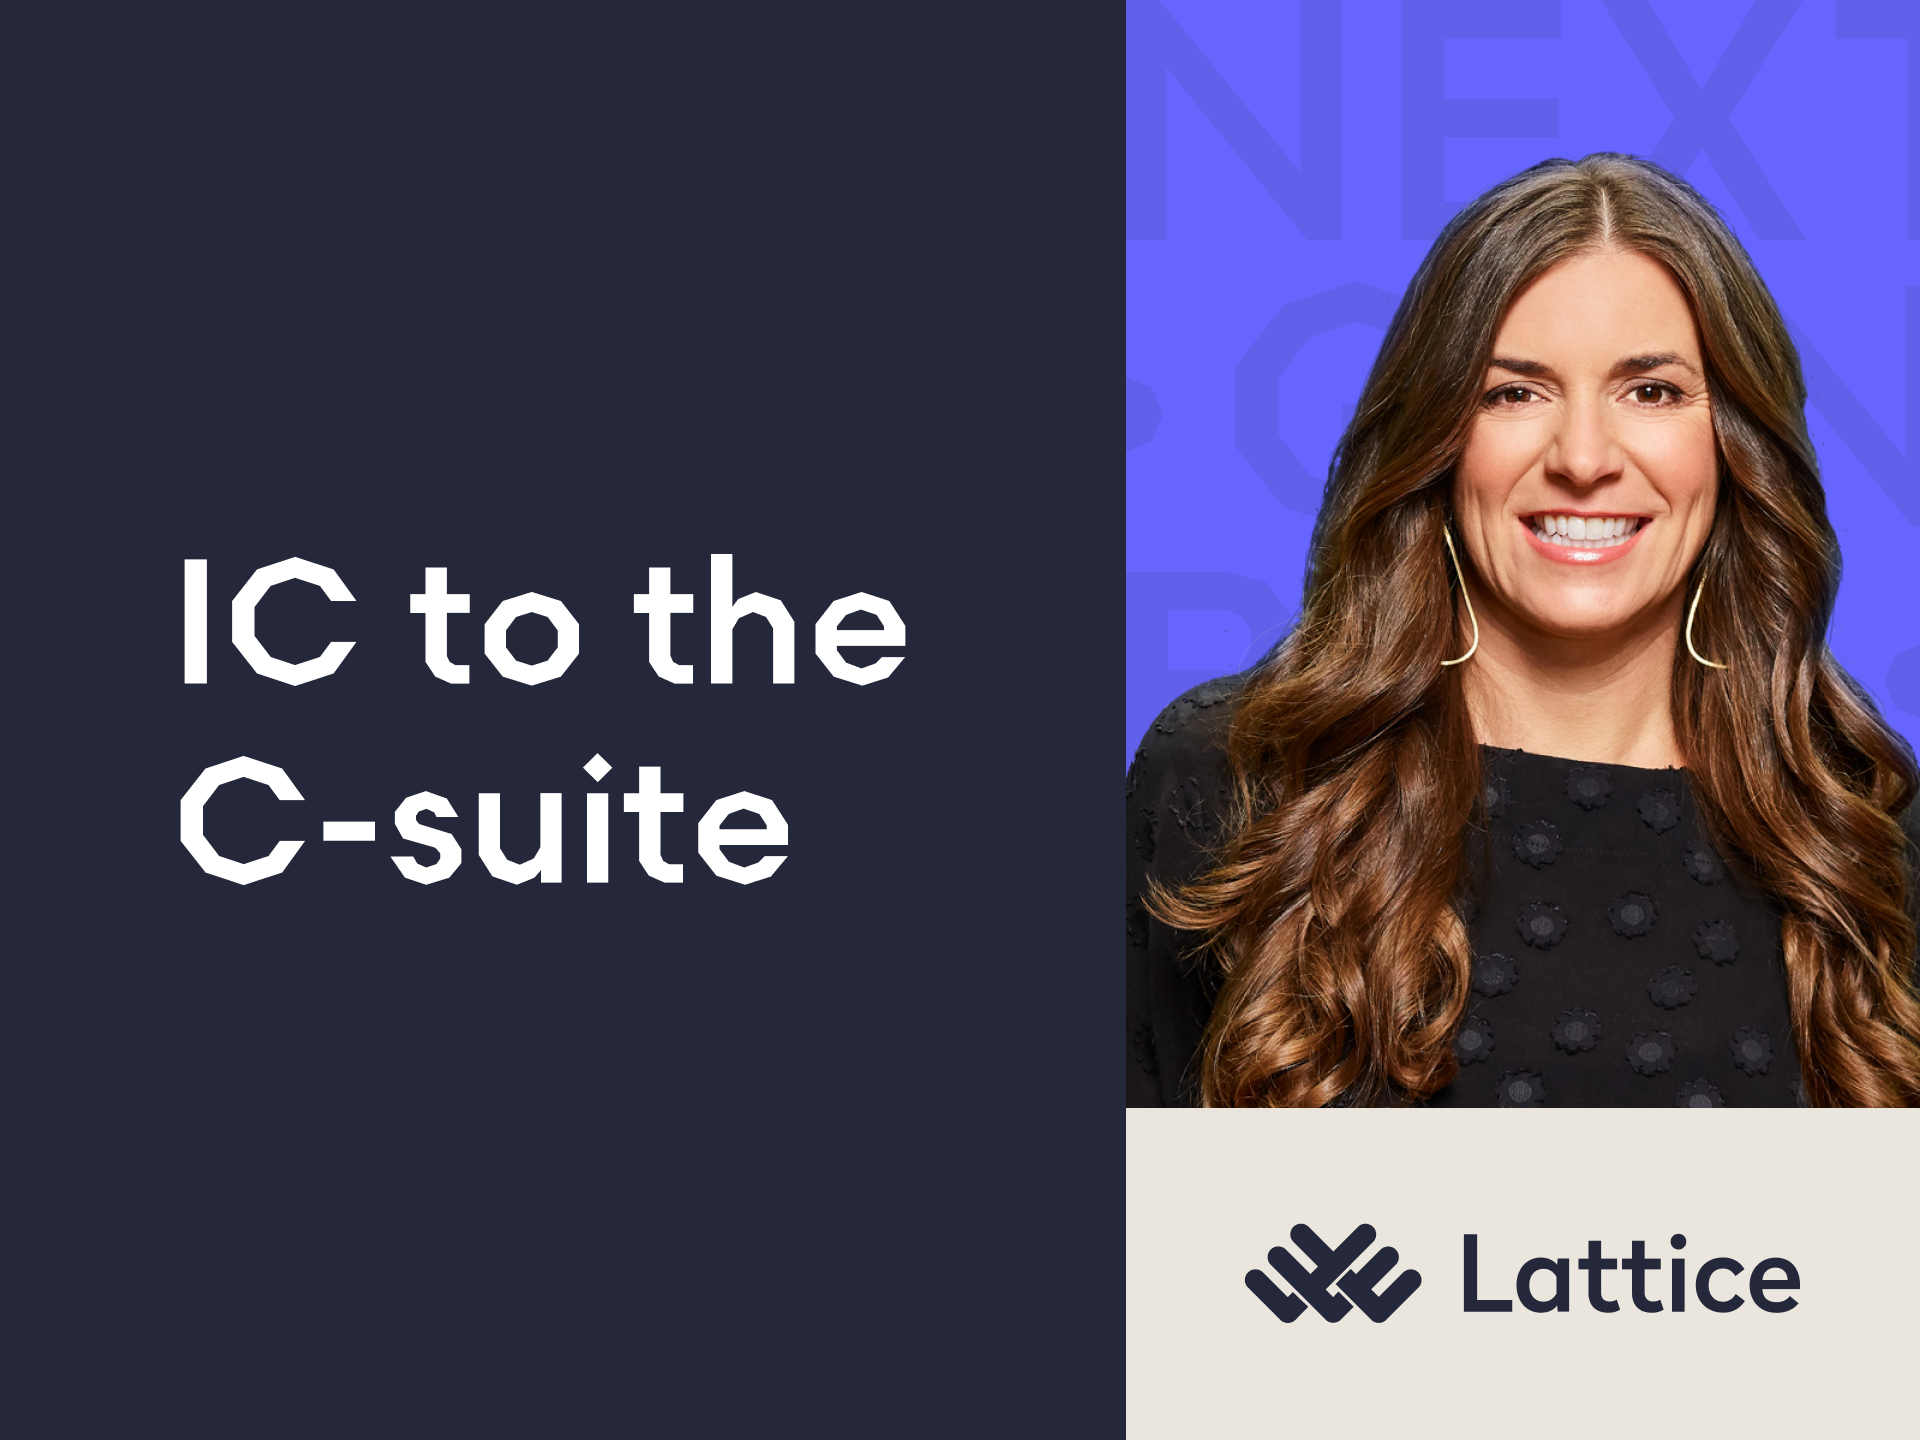 Next Gen Builders Episode 1 "IC to the C-suite" featuring Sarah Franklin, CEO of Lattice